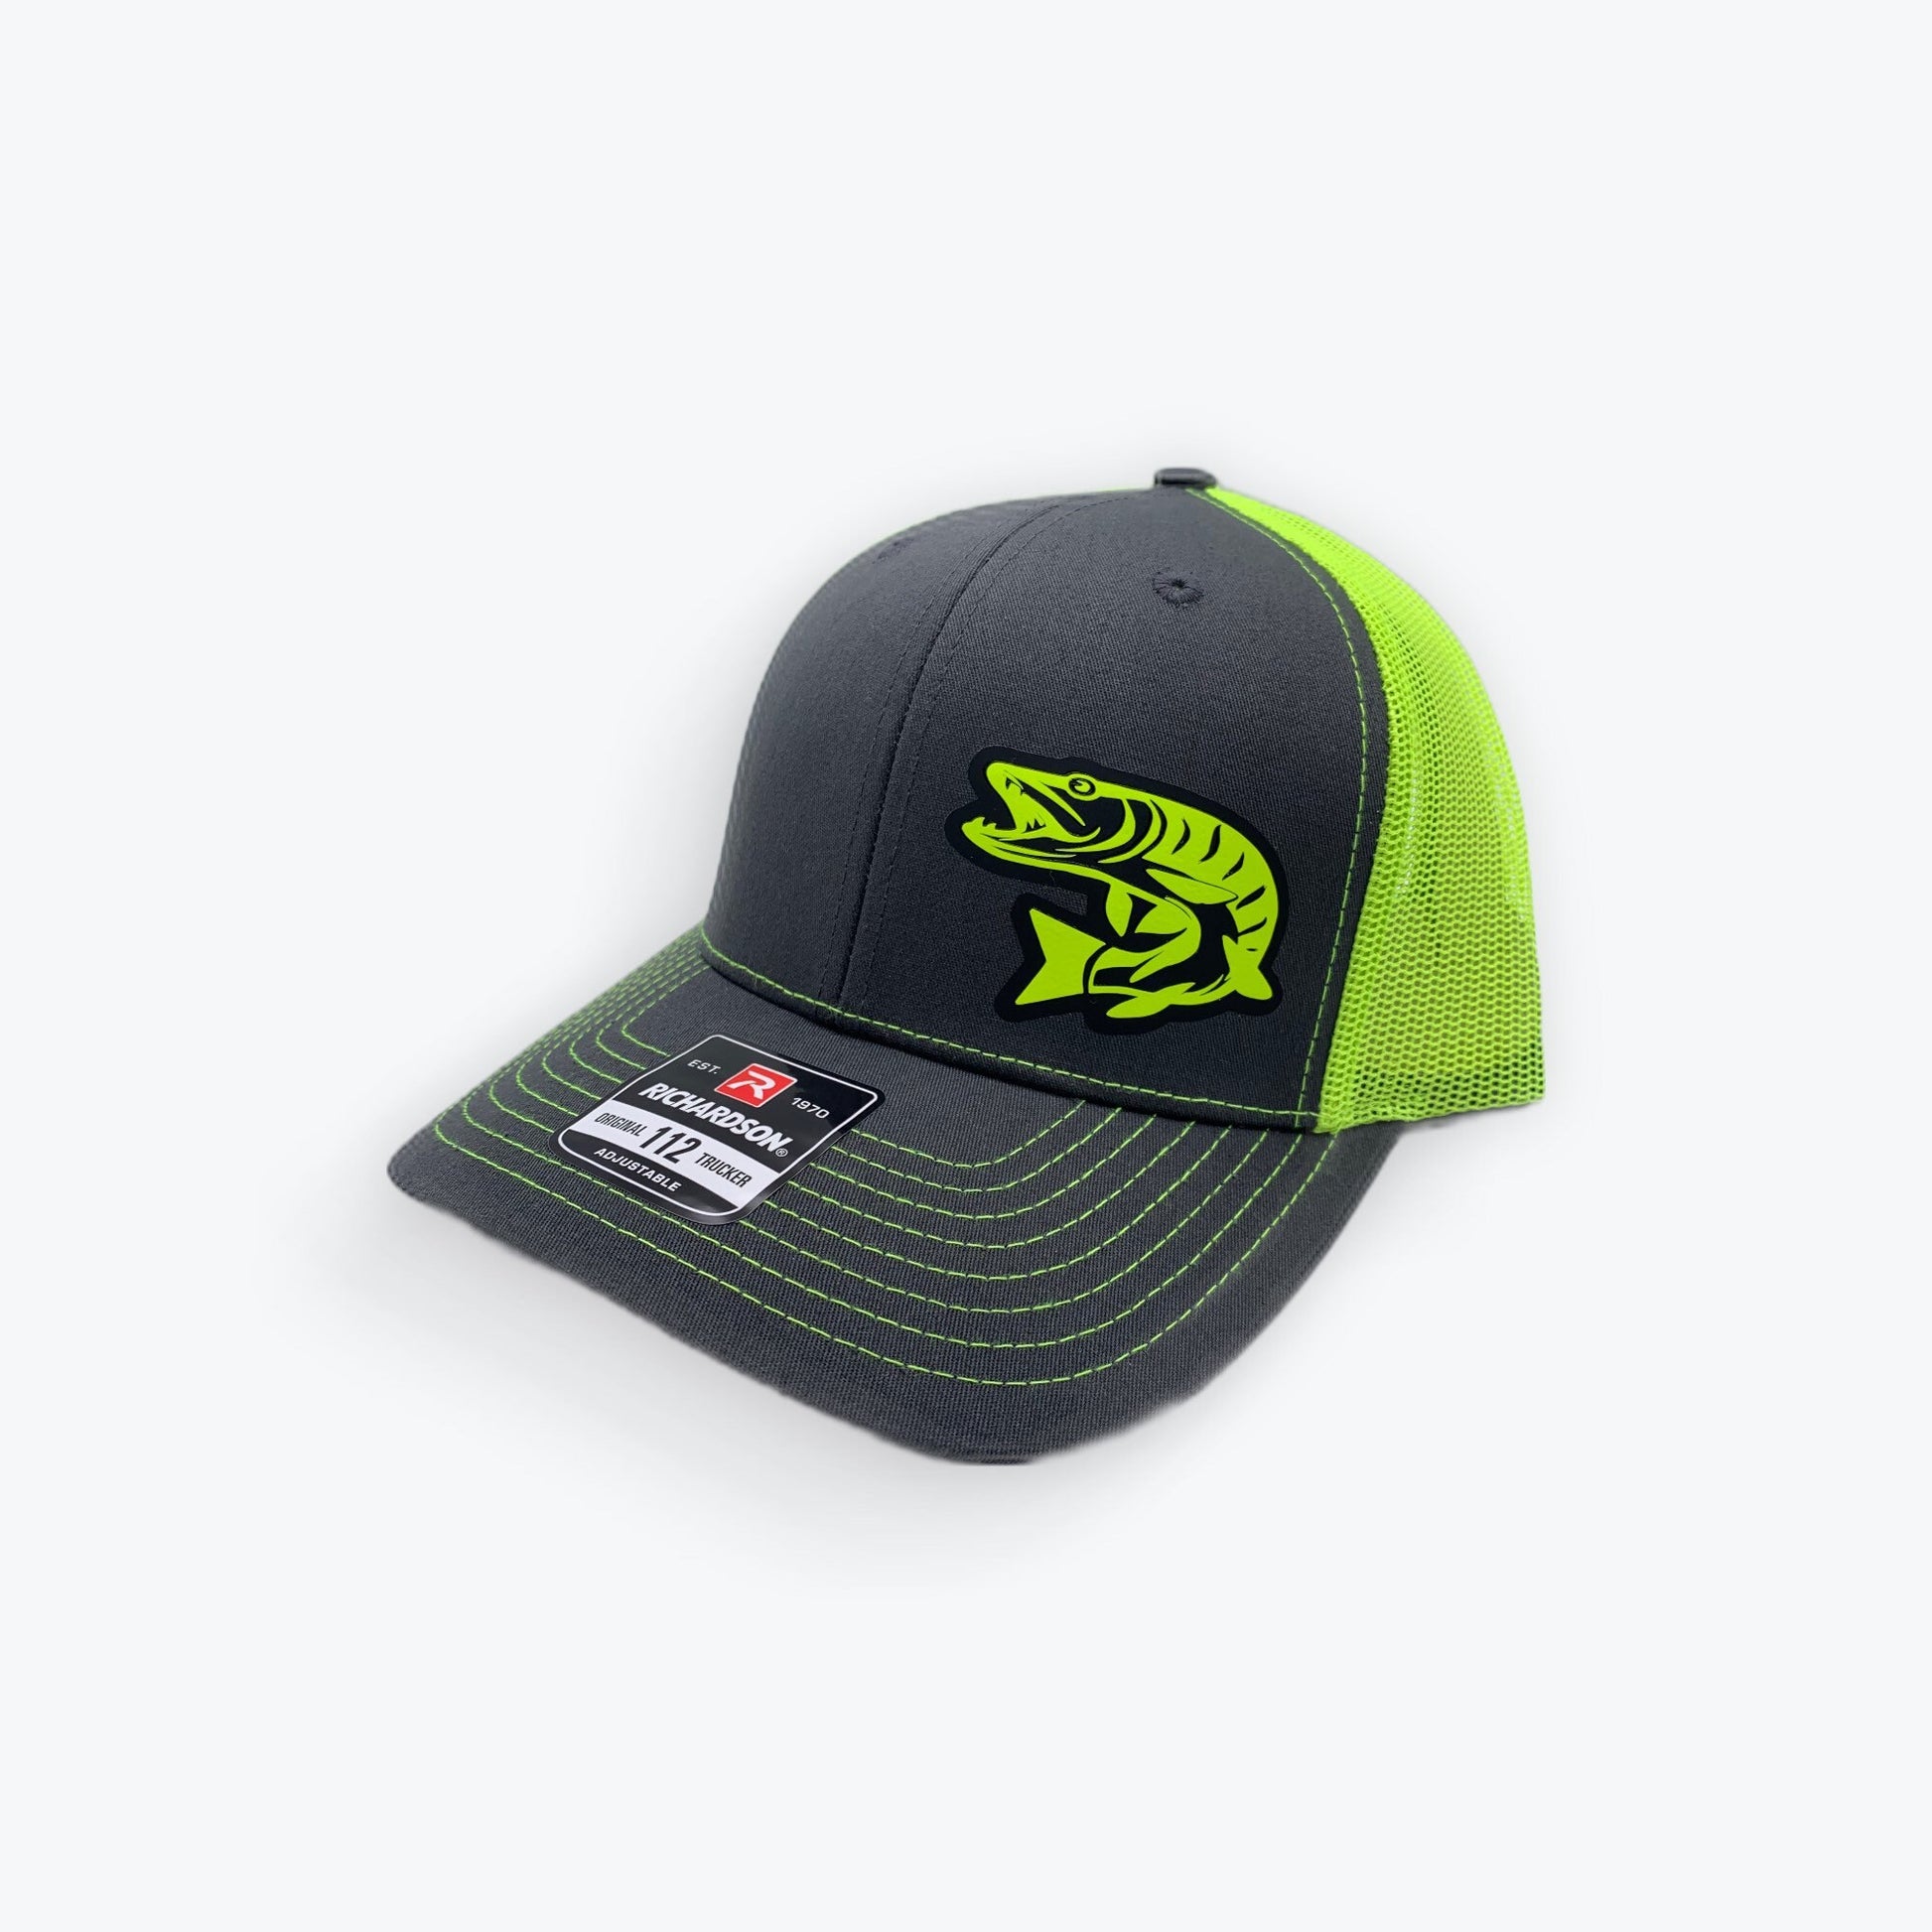 Crappie Fishing Snapback Adjustable Hat with Multiple Hat Color Options